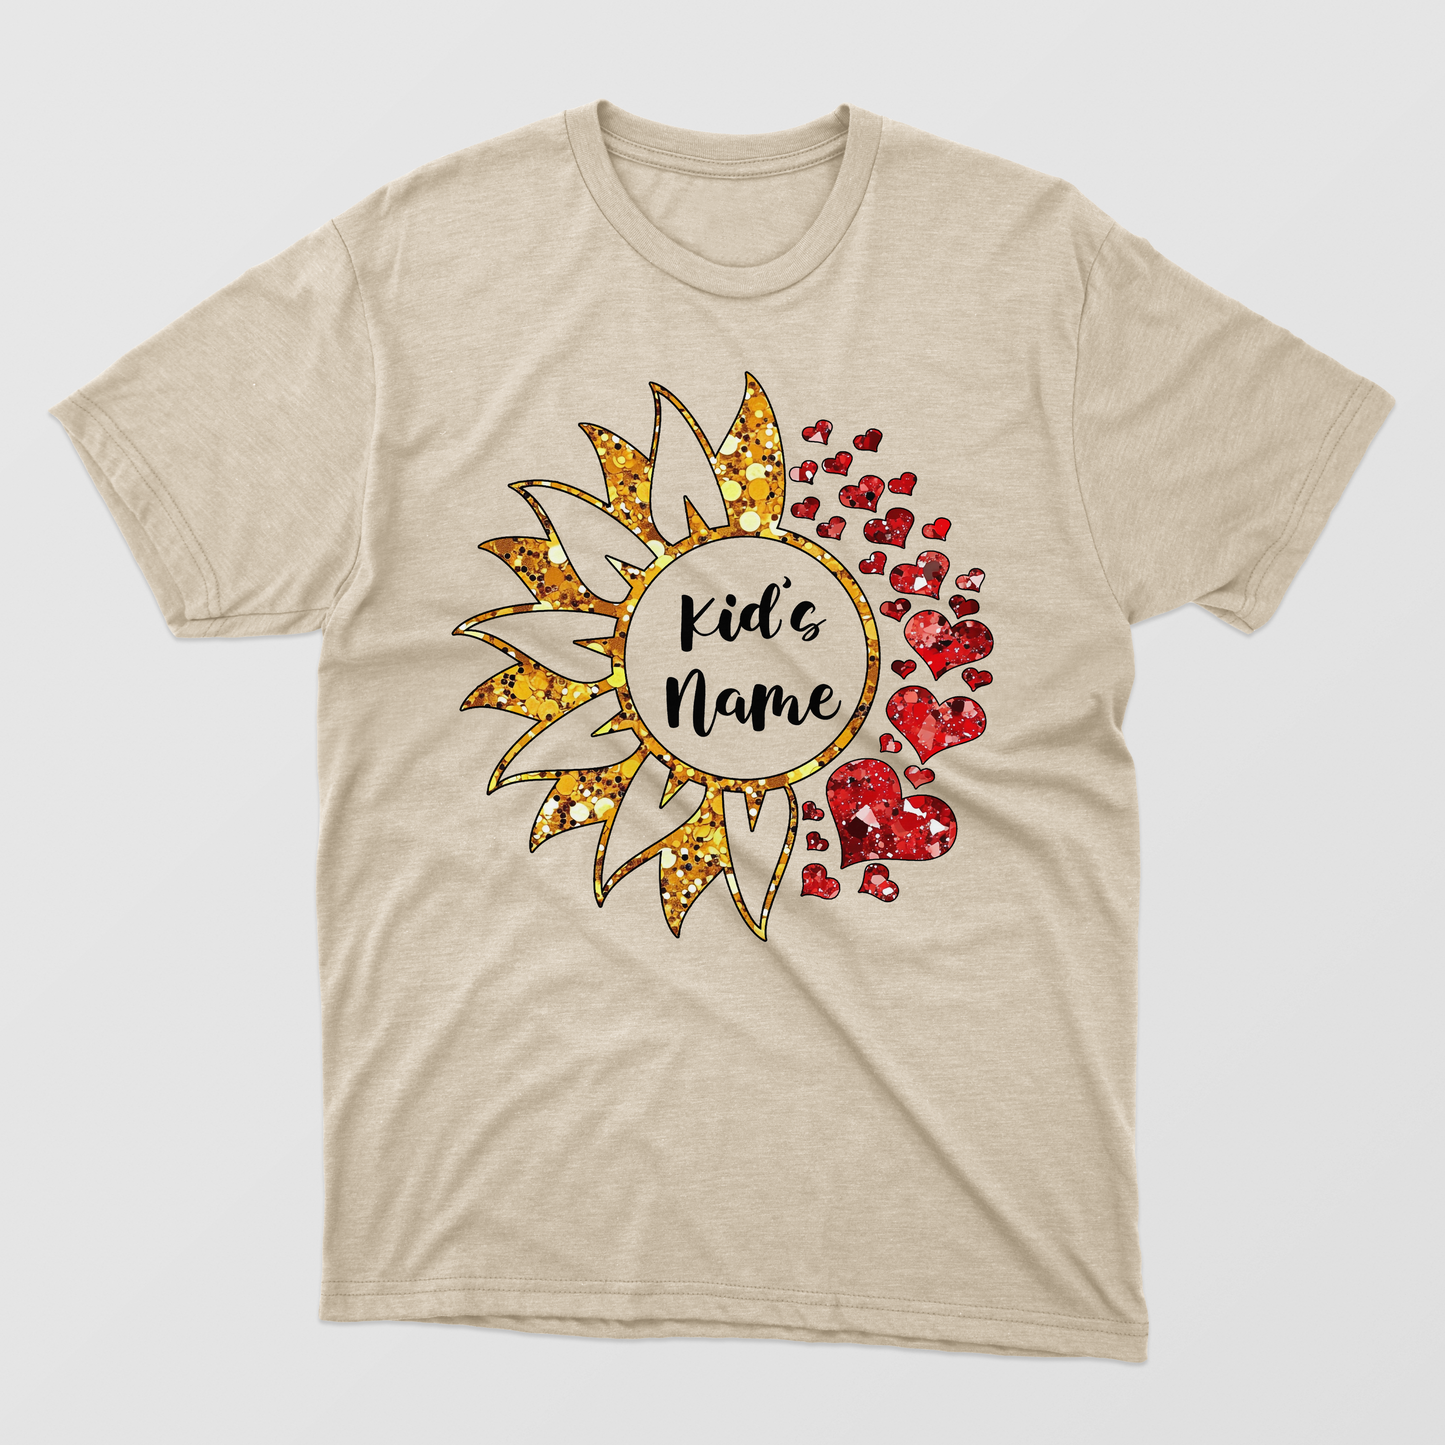 Customized Mother's Day Shirt, Personalized Kid's Name Shirt, Customized Sunflower Shirt, Floral Custom Shirt, Floral Gift Idea Shirt For Mother's Day, Glitter Sunflower Shirt, Mother's Day 2024 Shirt